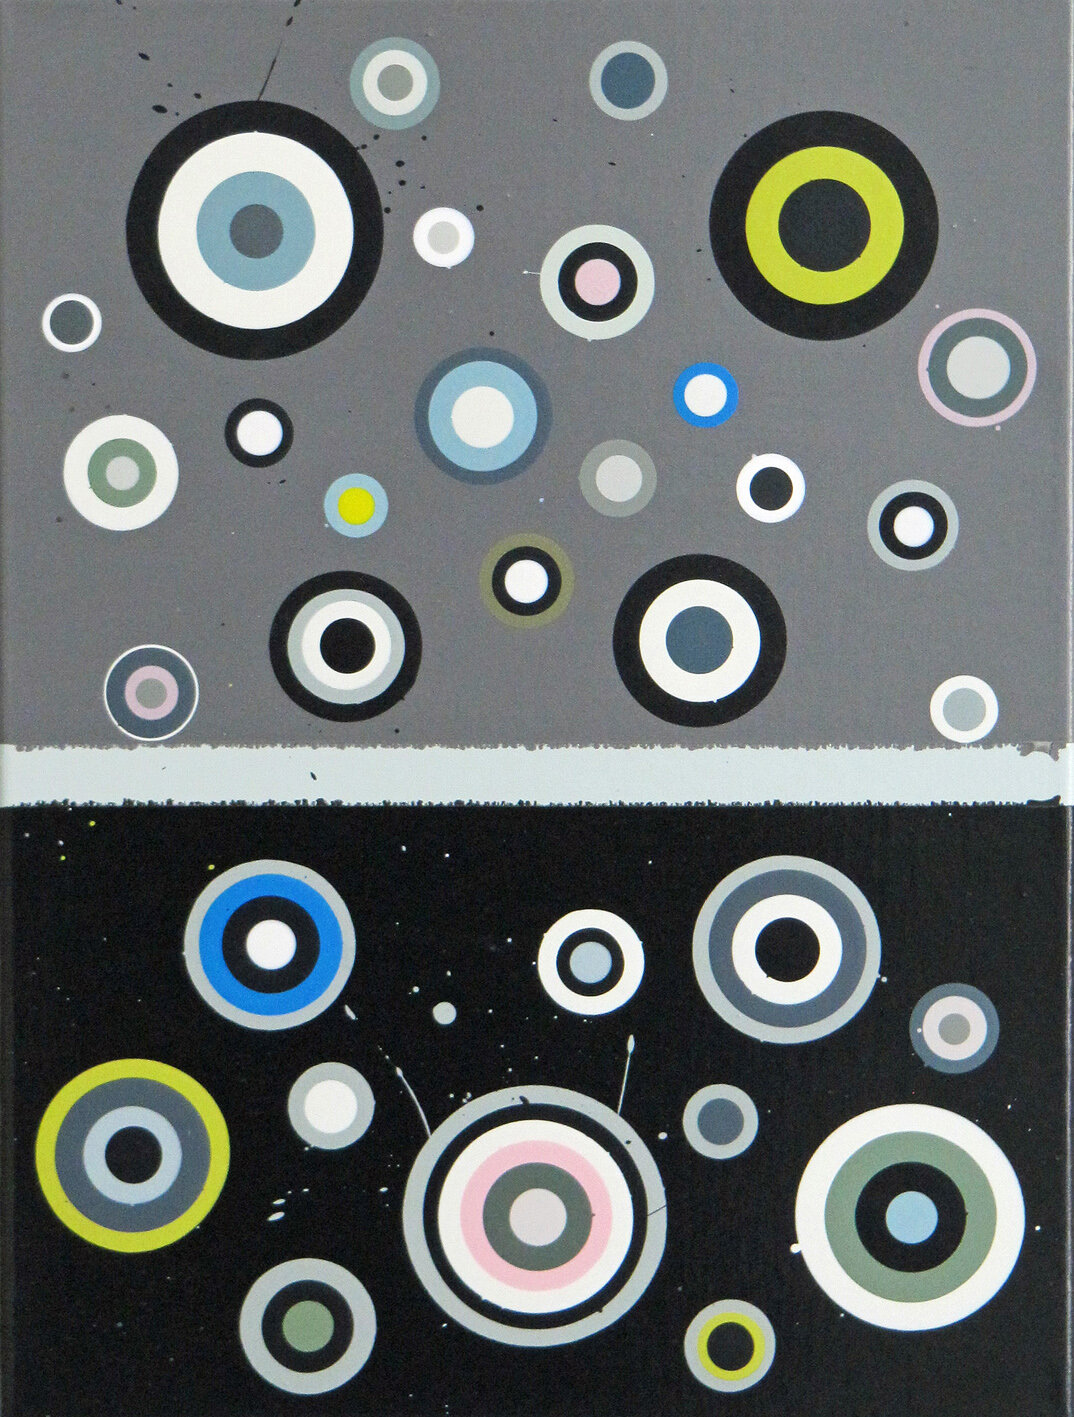  o.T., 2020, acrylic and lacquer on canvas, 40 x 30 cm 